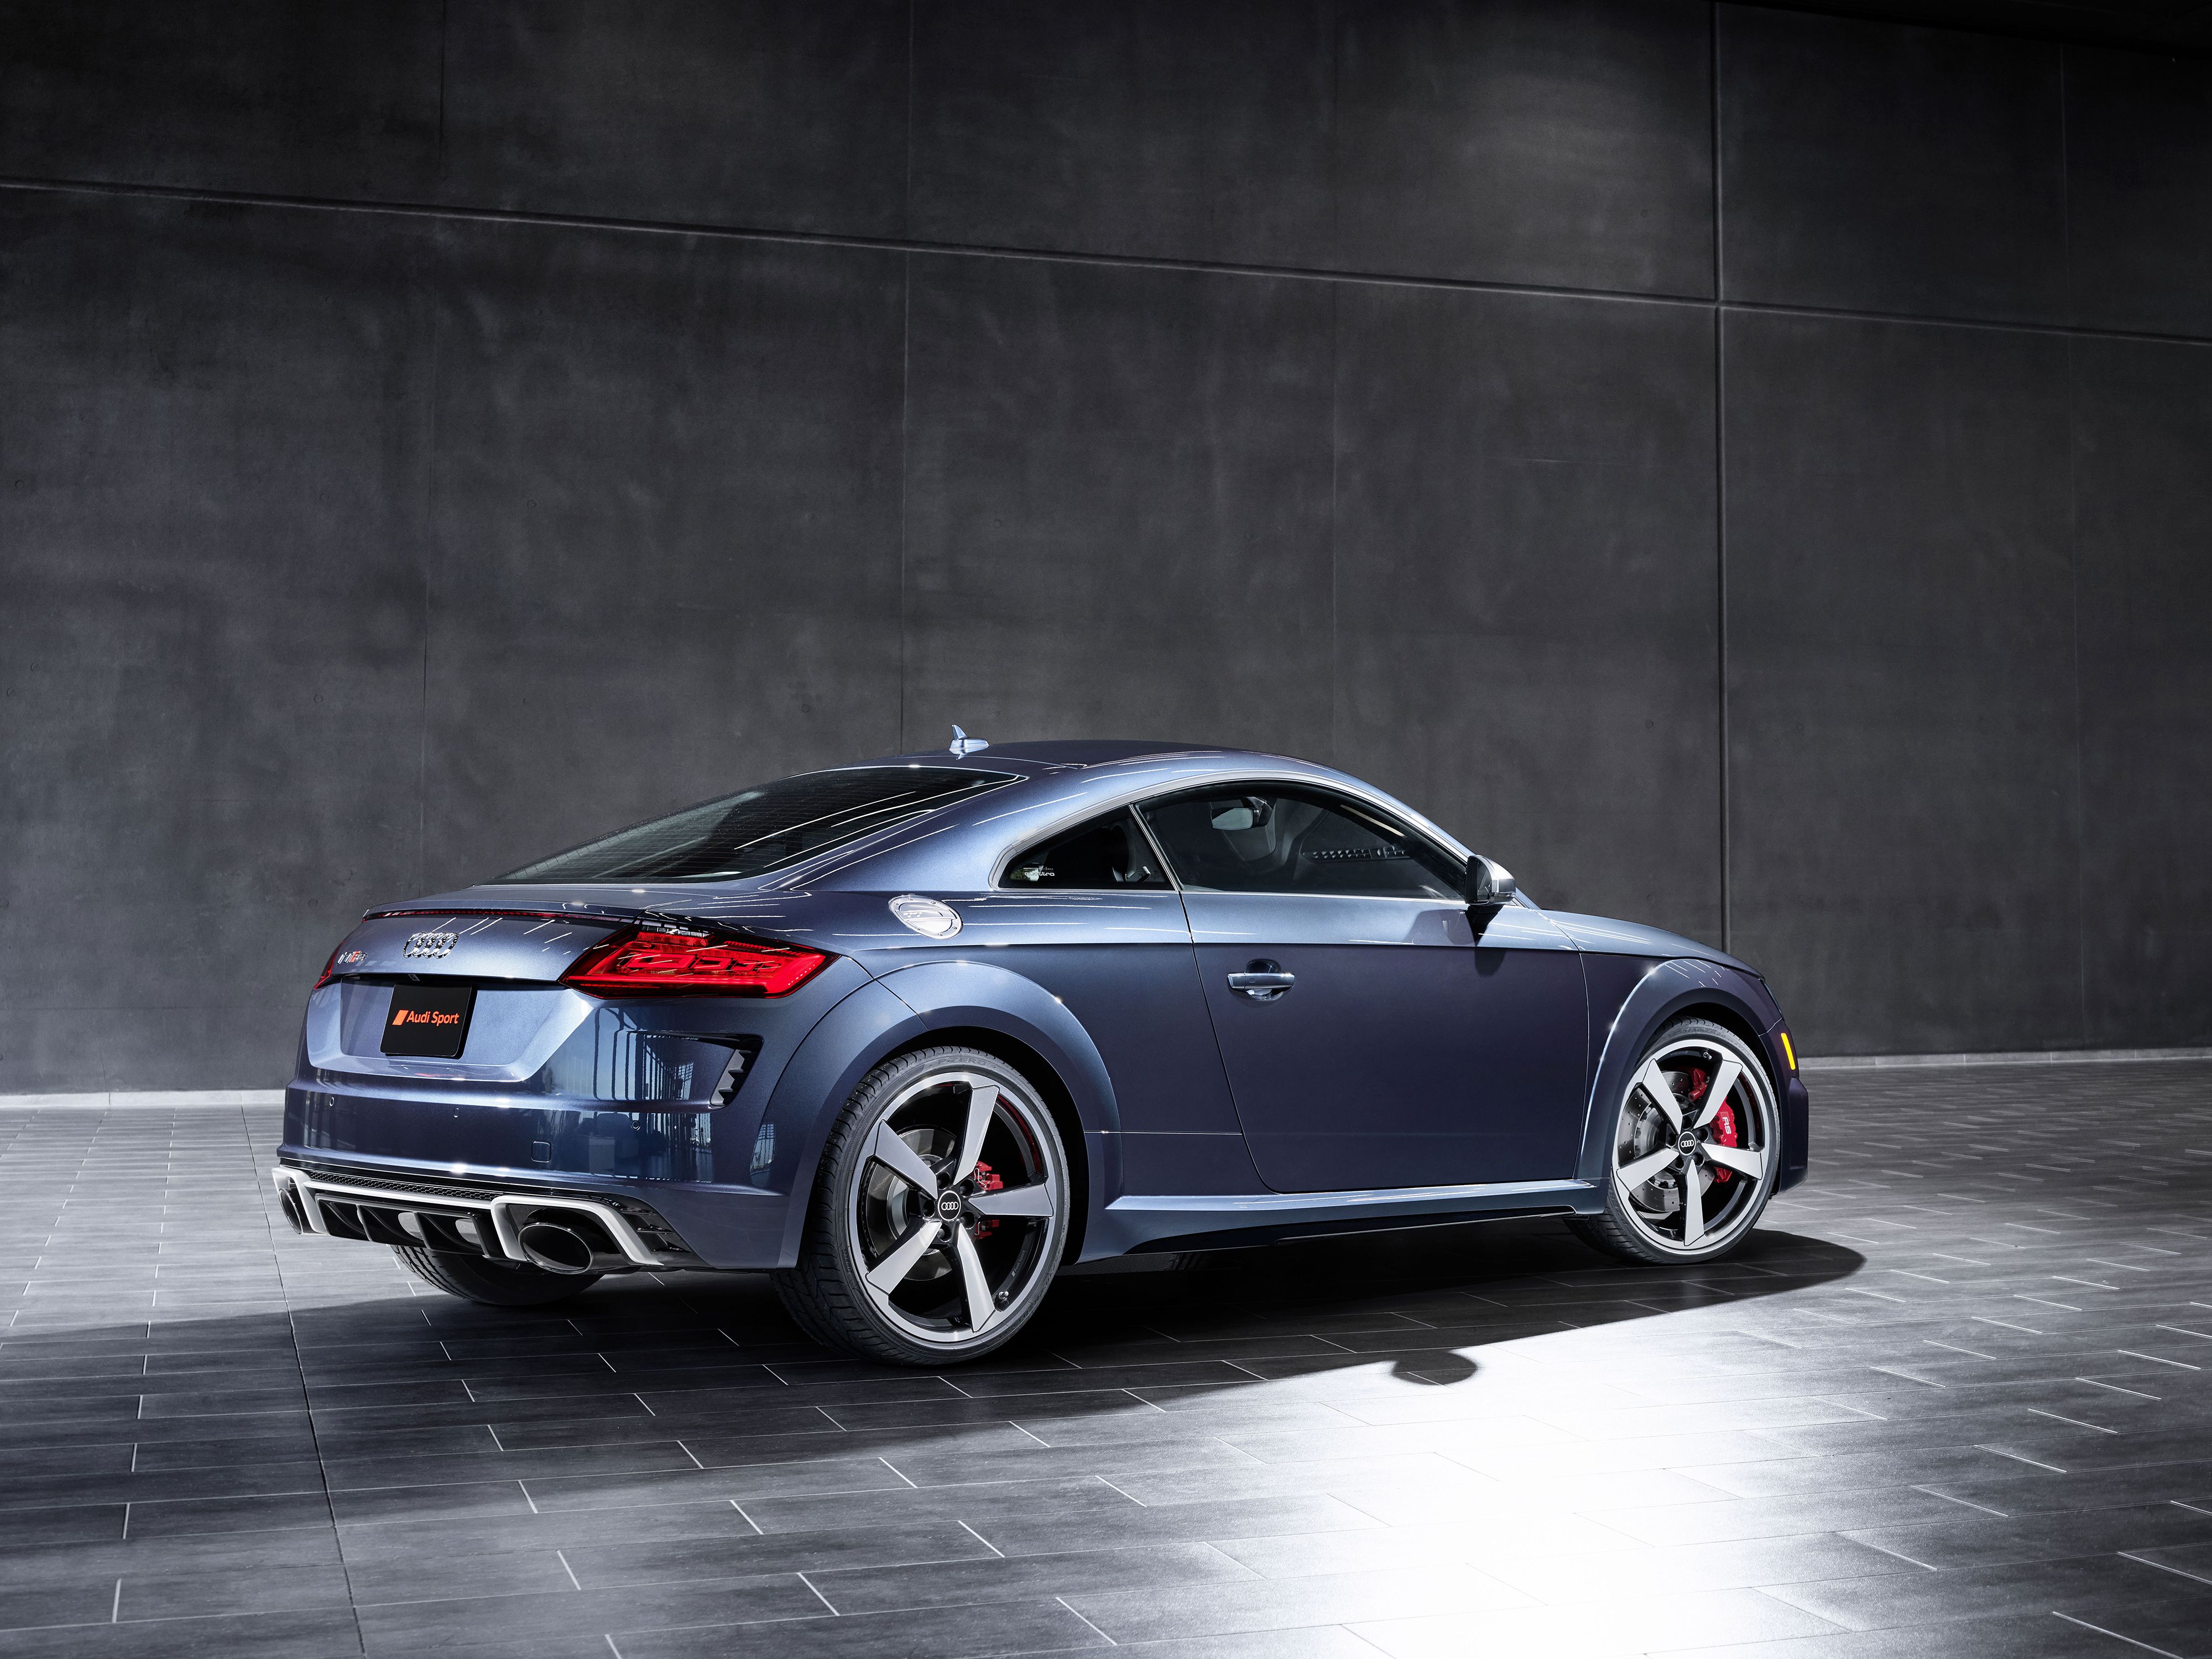 2022 Audi TT RS Review, Pricing, and Specs